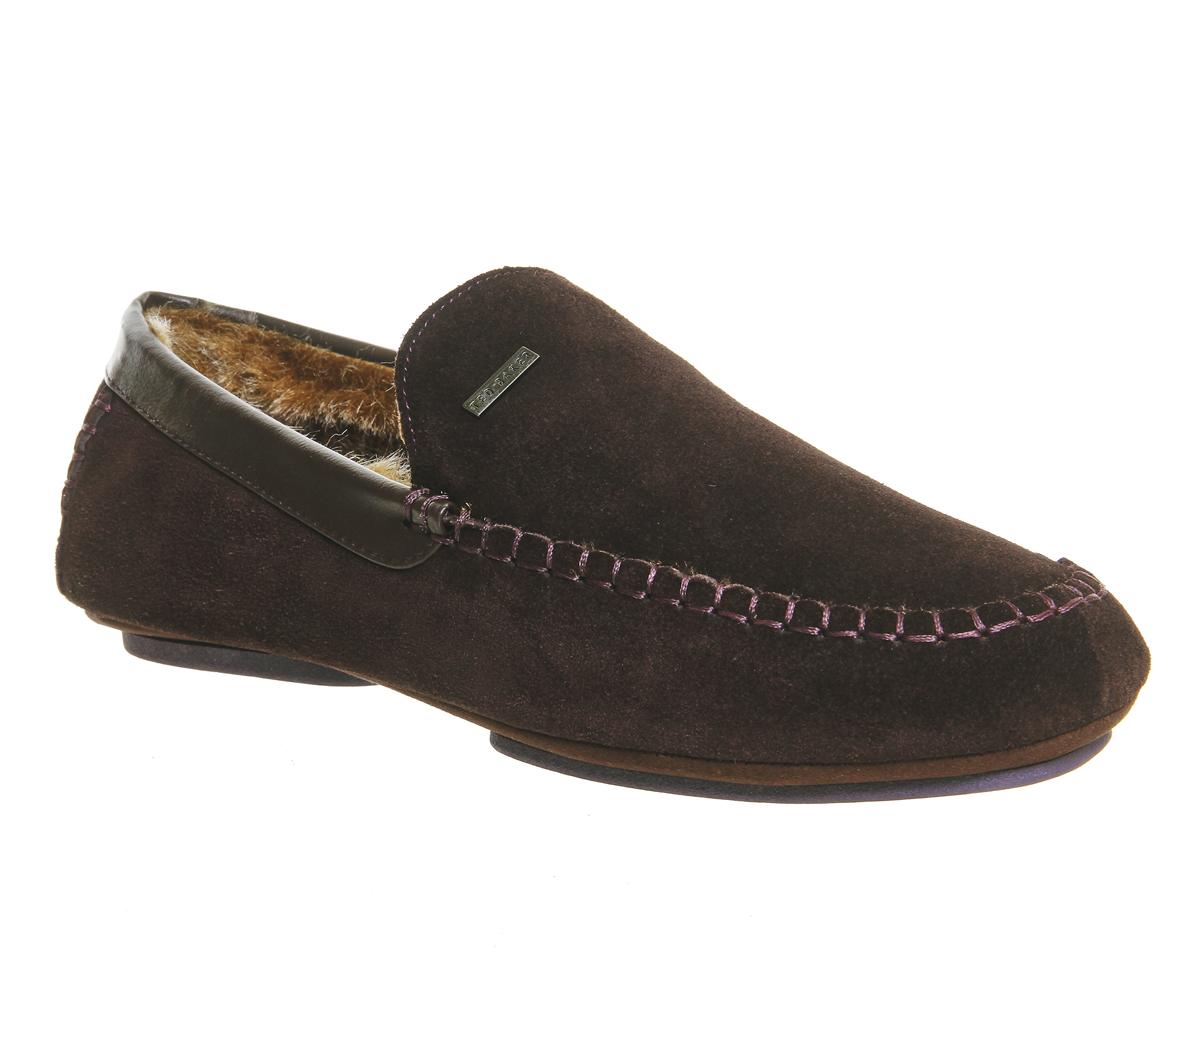 Ted BakerMoriss SlipperBrown Suede